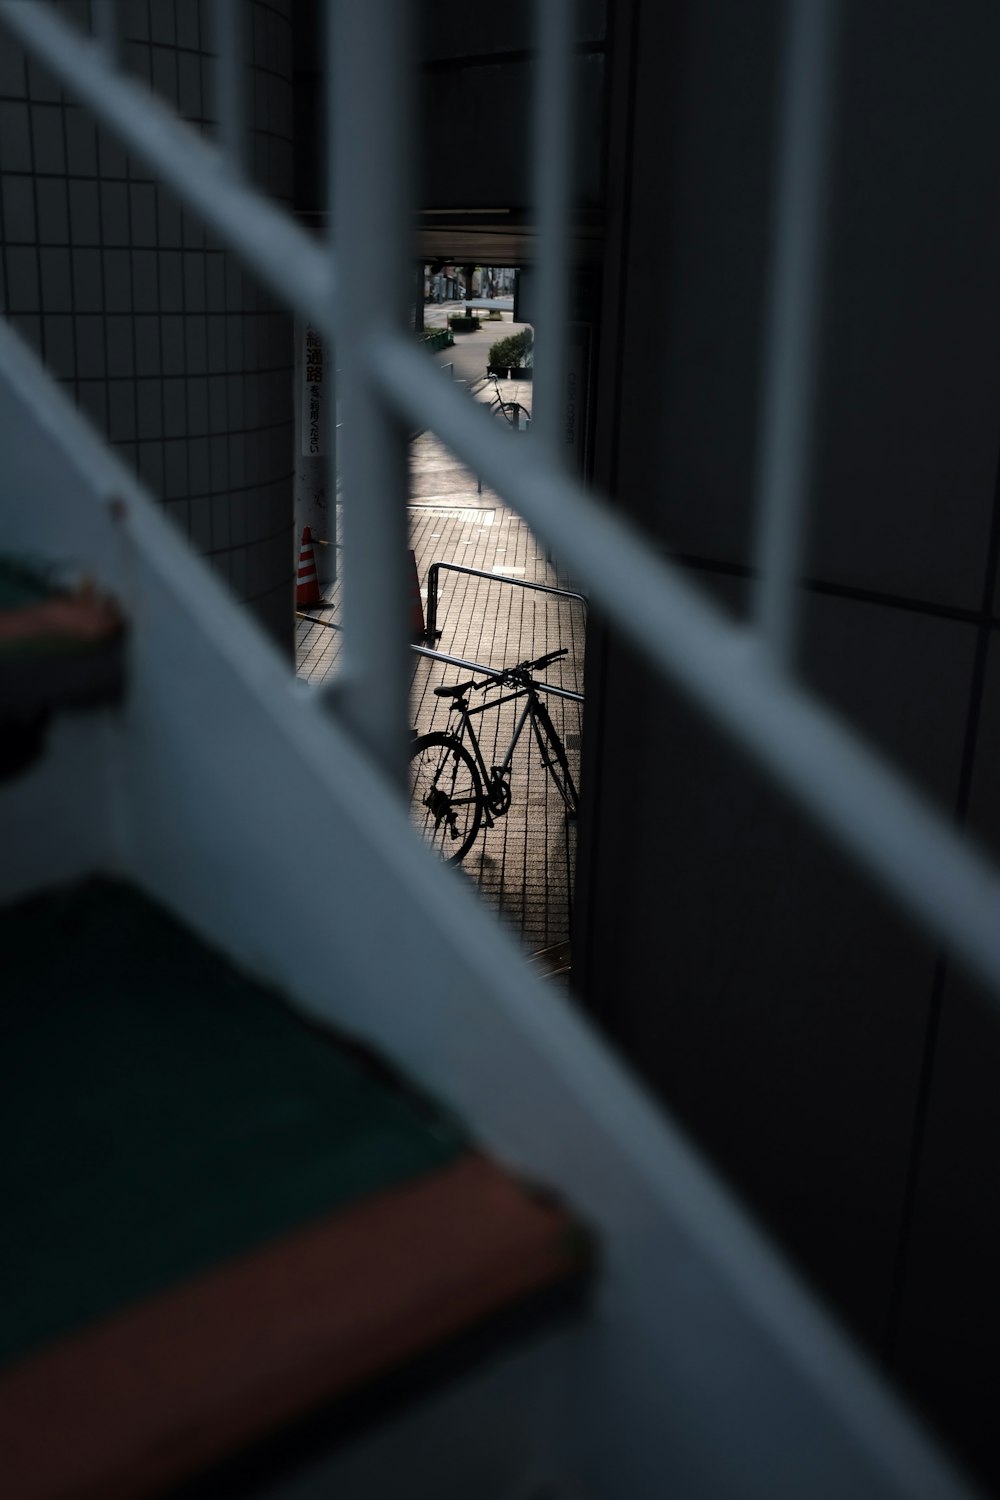 a bike is seen through the bars of a jail cell